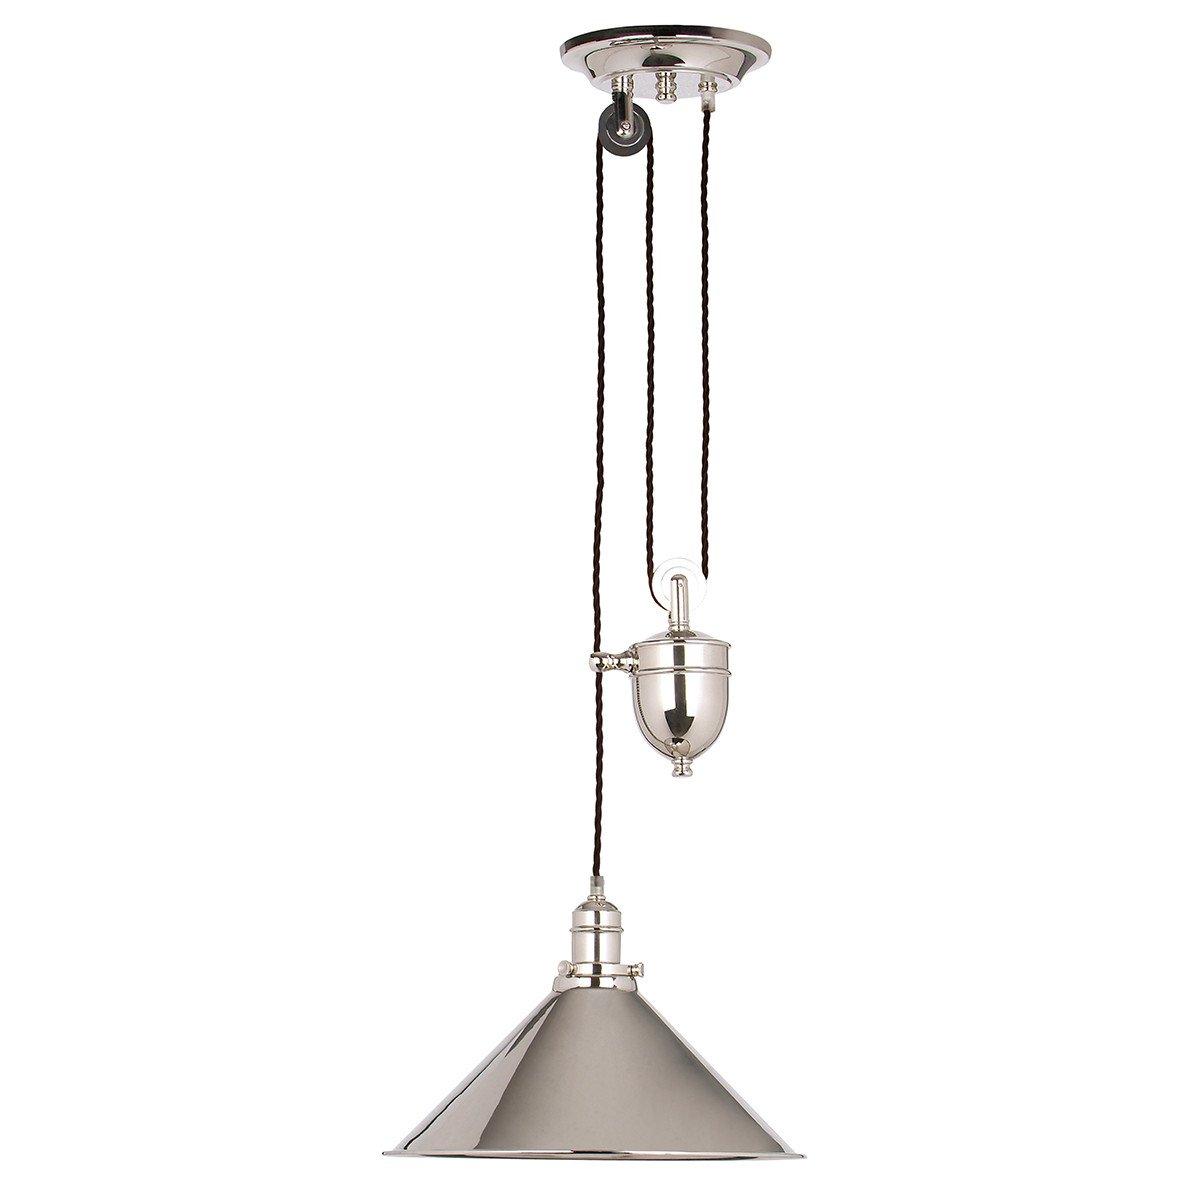 Elstead Lighting Provence Polished Nickel Rise and Fall Light